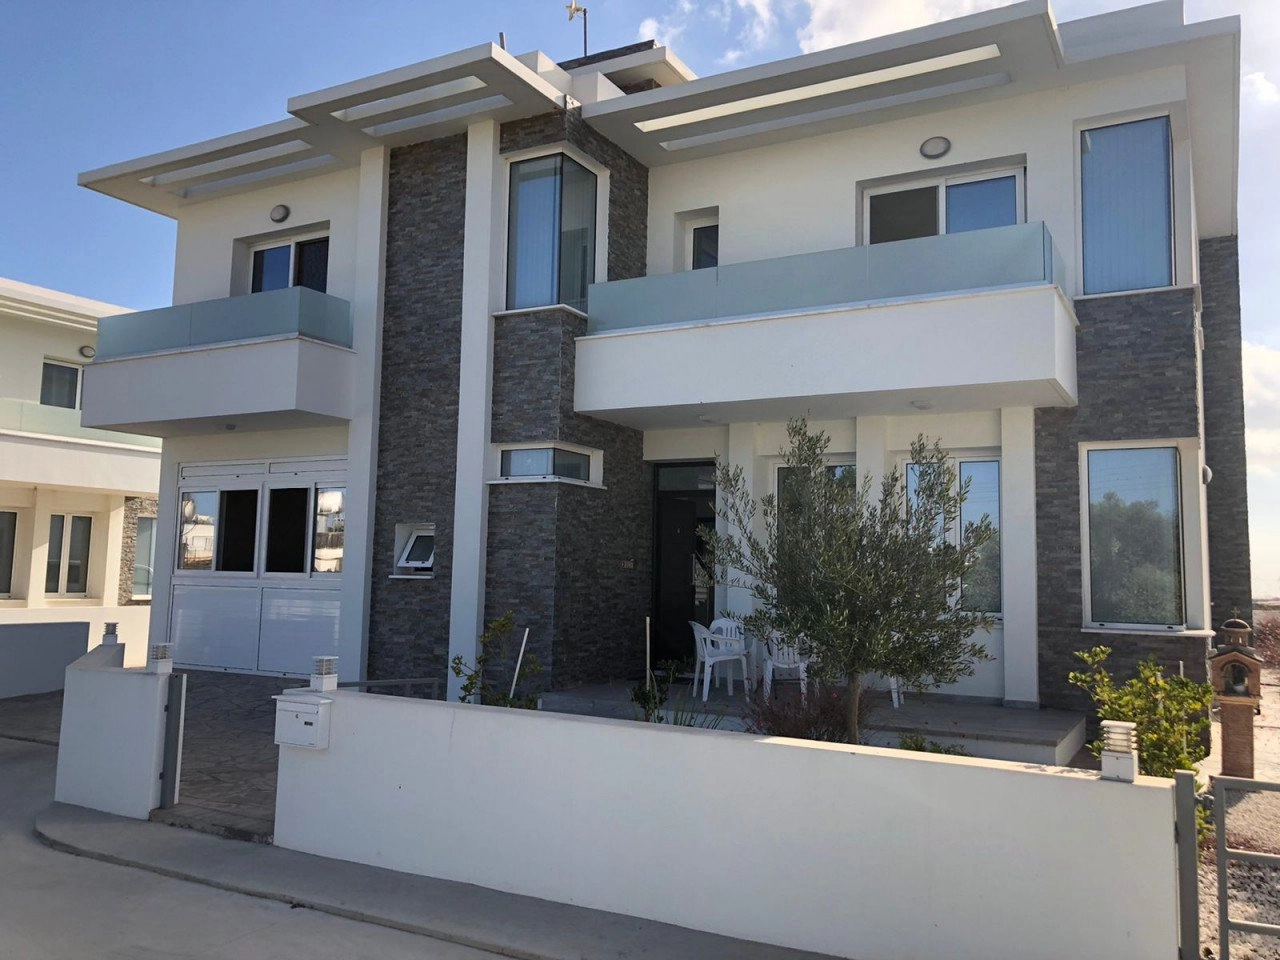 4 Bedroom House for Sale in Paralimni, Famagusta District